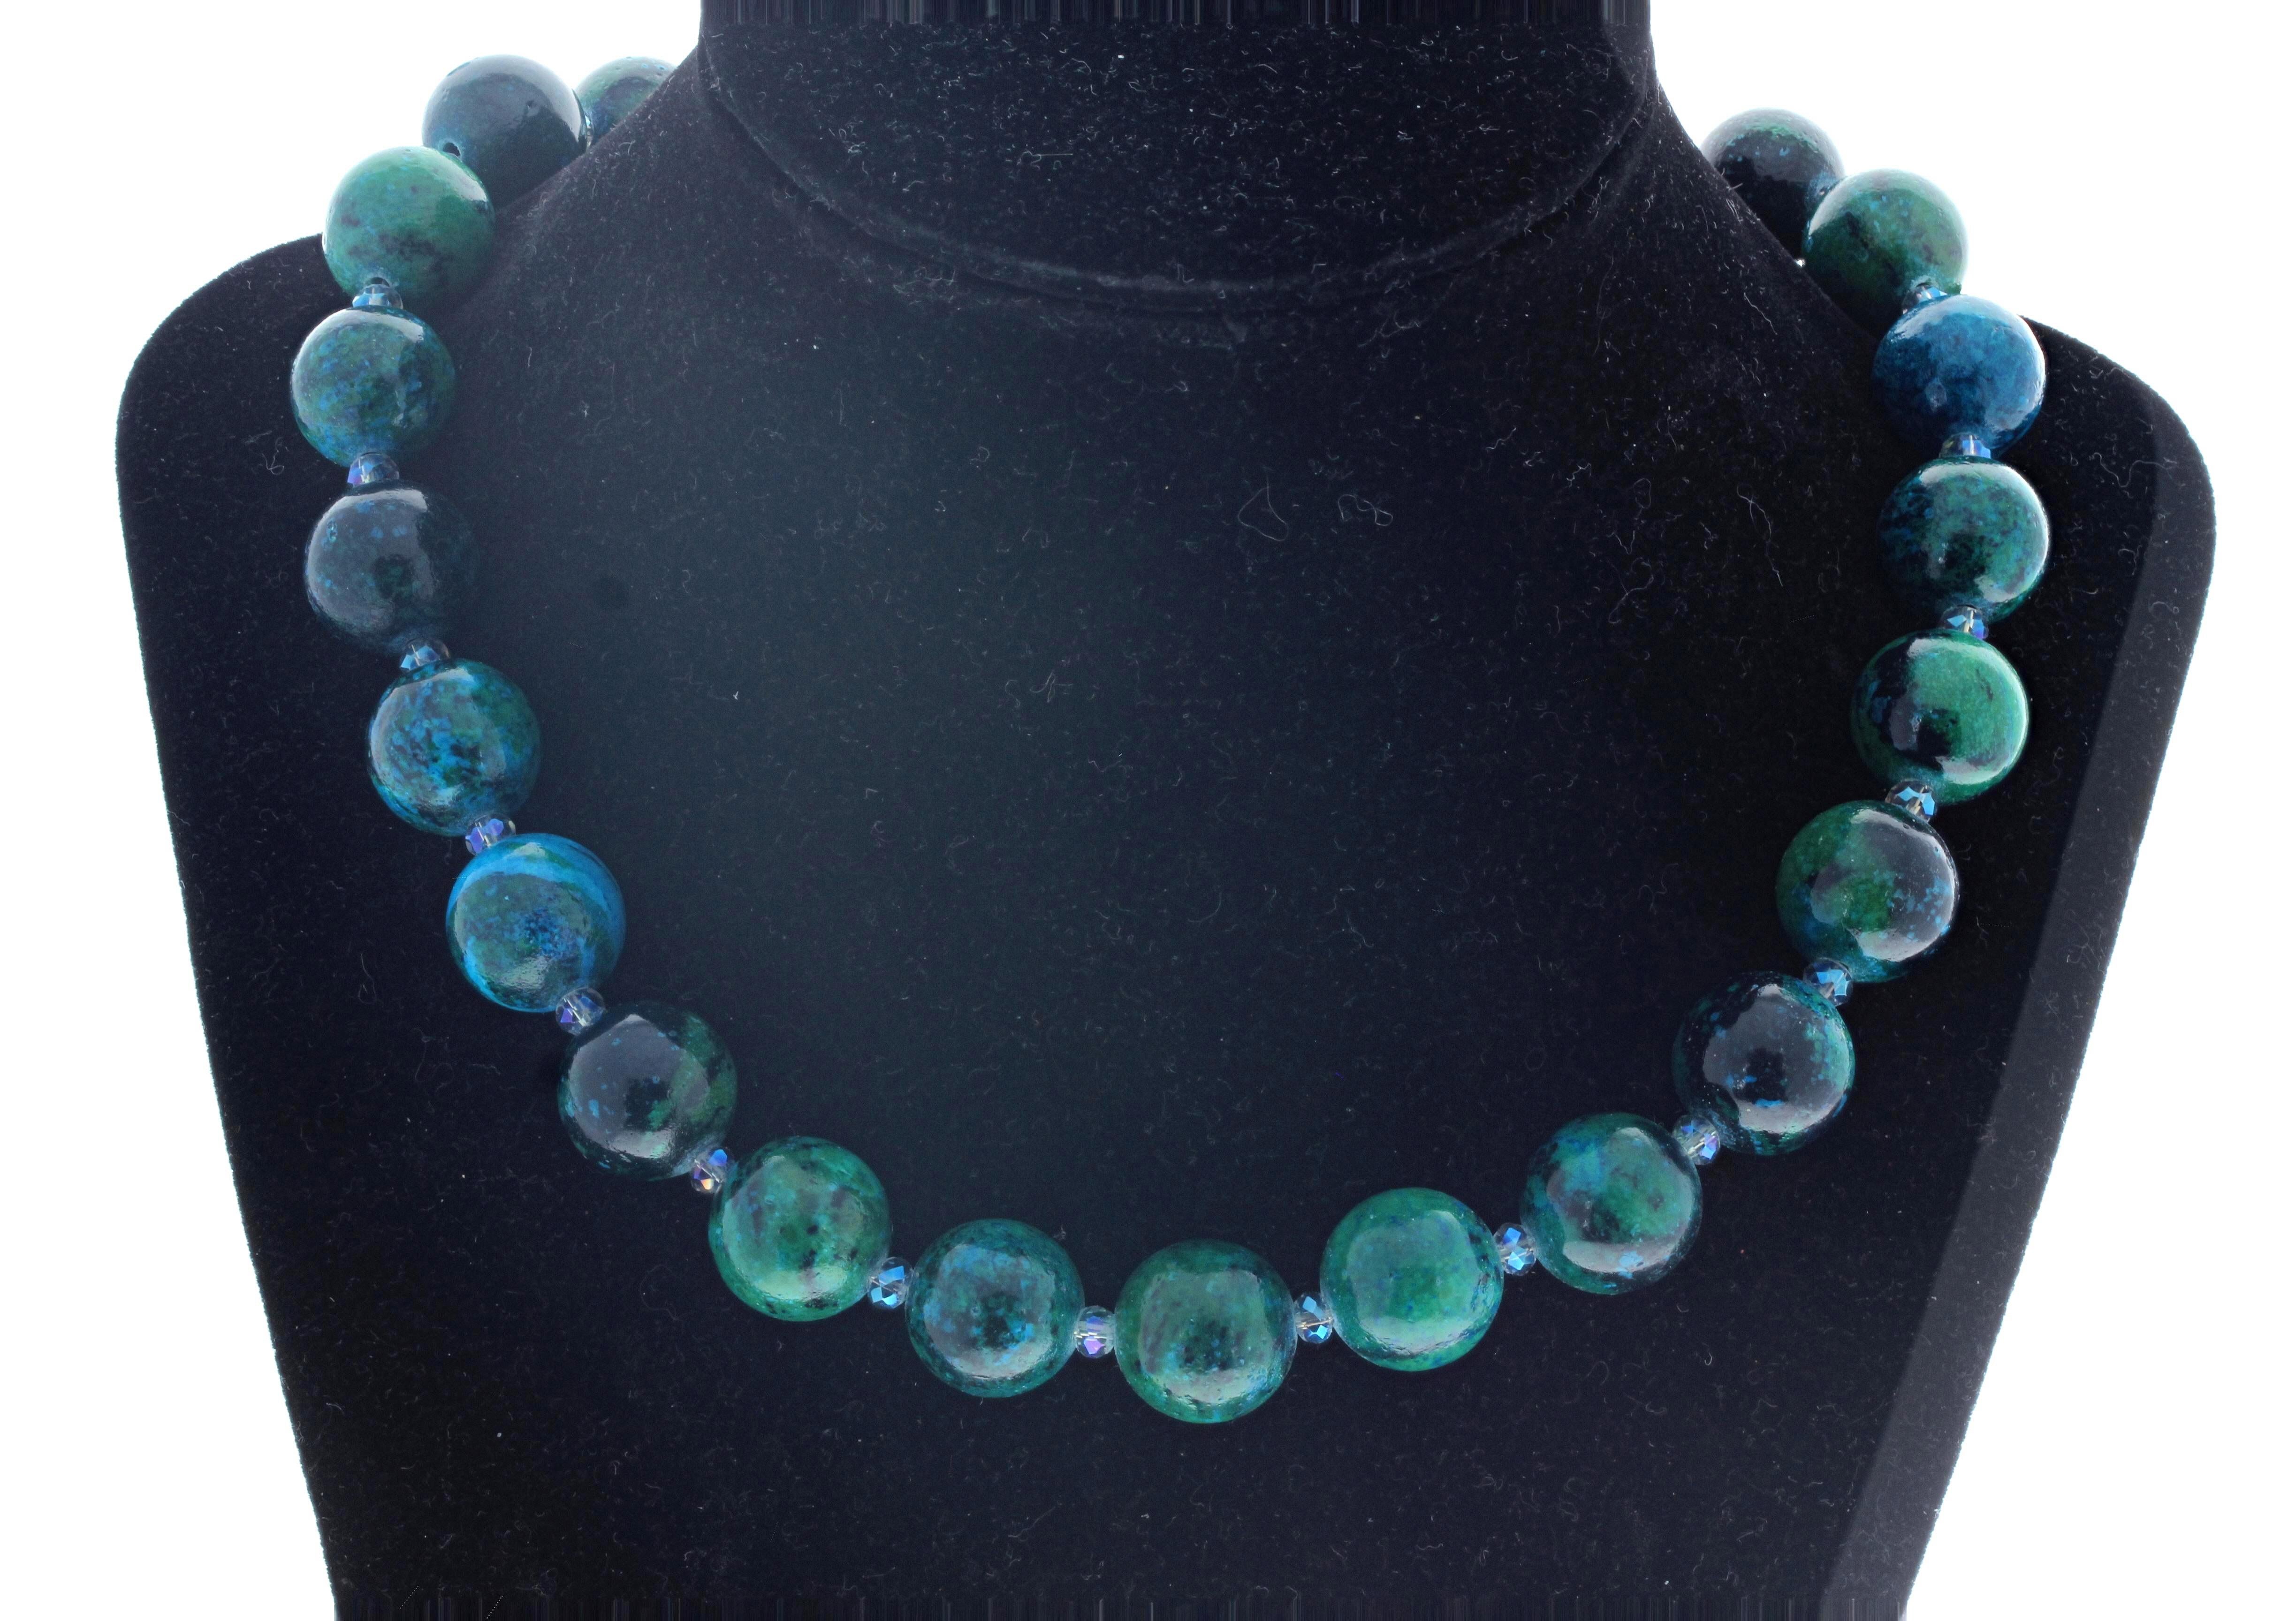 This beautiful highly polished natural real Chrysocolla 17 inch long necklace glows beautifully.  They are all approximately 15mm.  The little sparklers in between the gemstones are a fascinating blue-green color.  The clasp is an easy to use silver